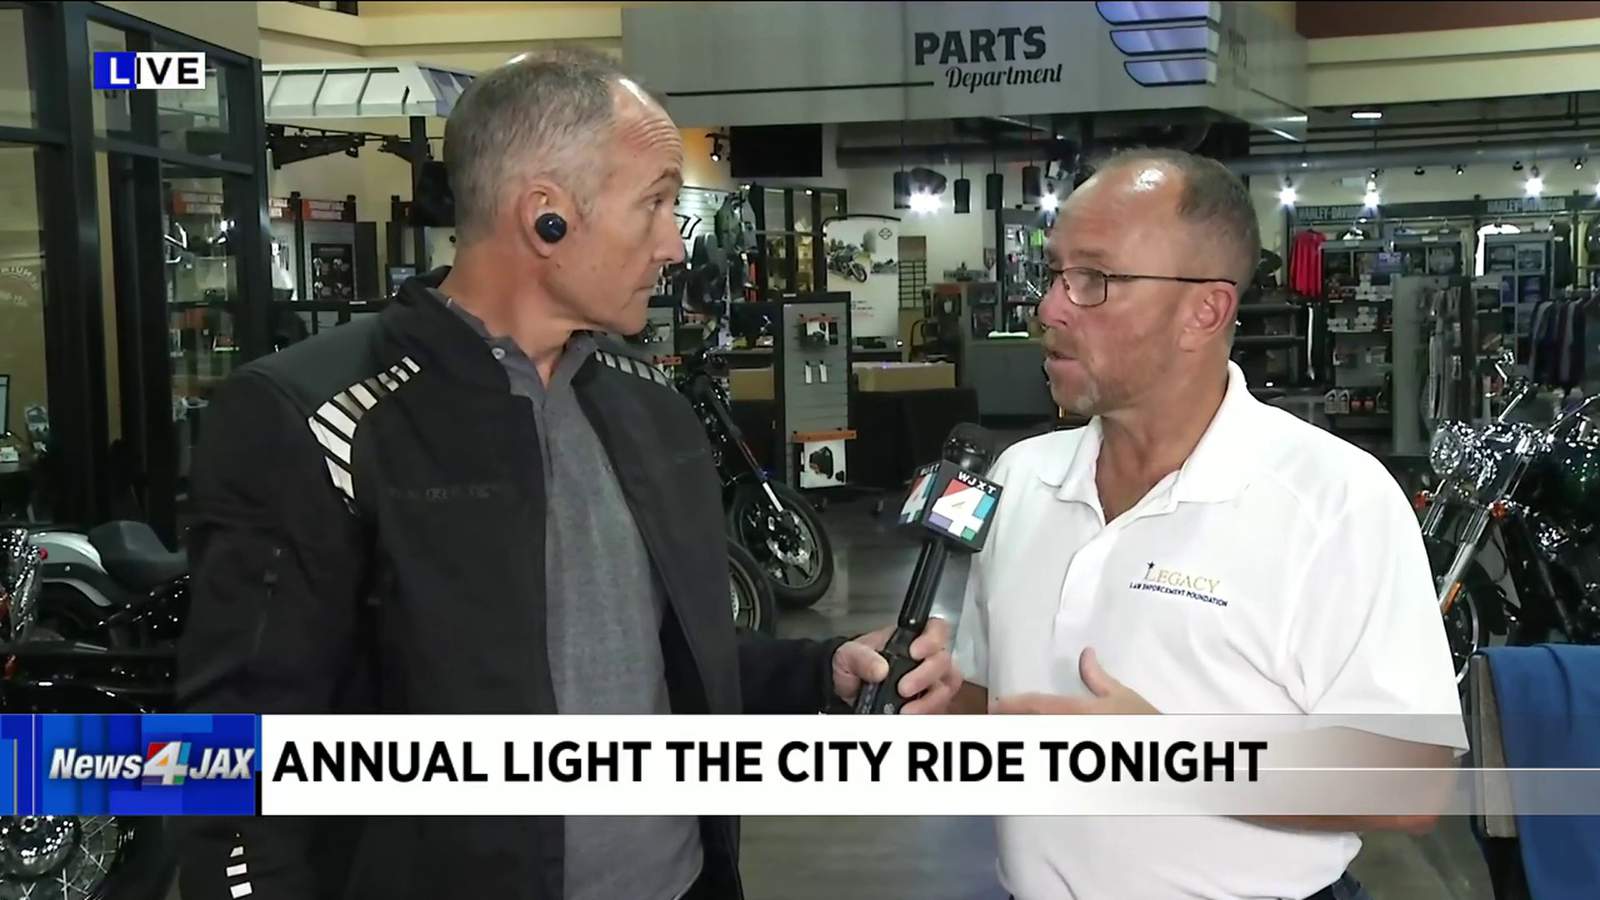 Richard ready to ride for Jacksonville’s ‘Light the City’ event